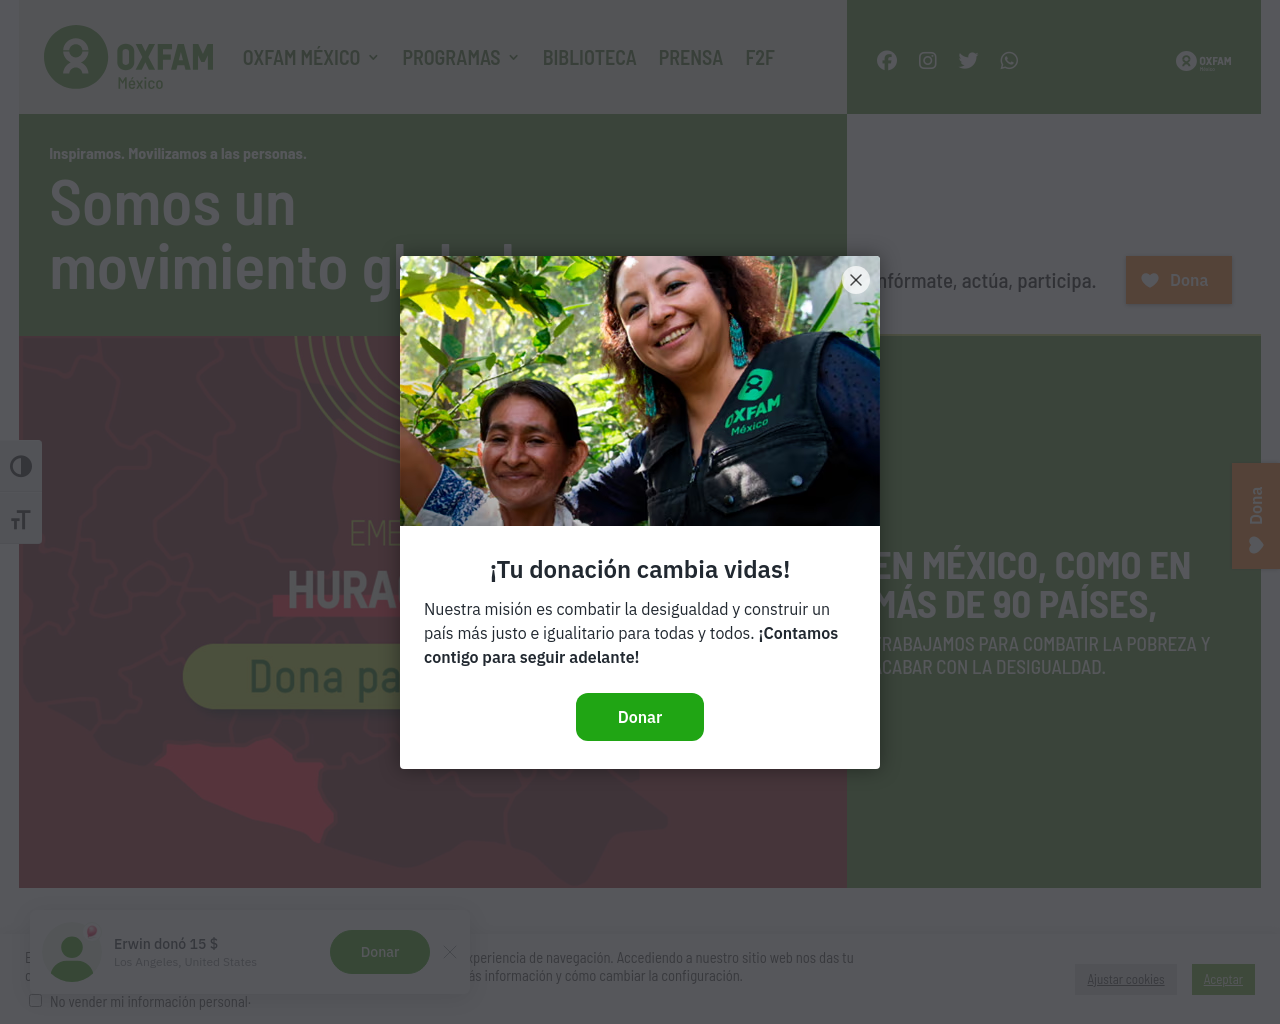 oxfammexico.org